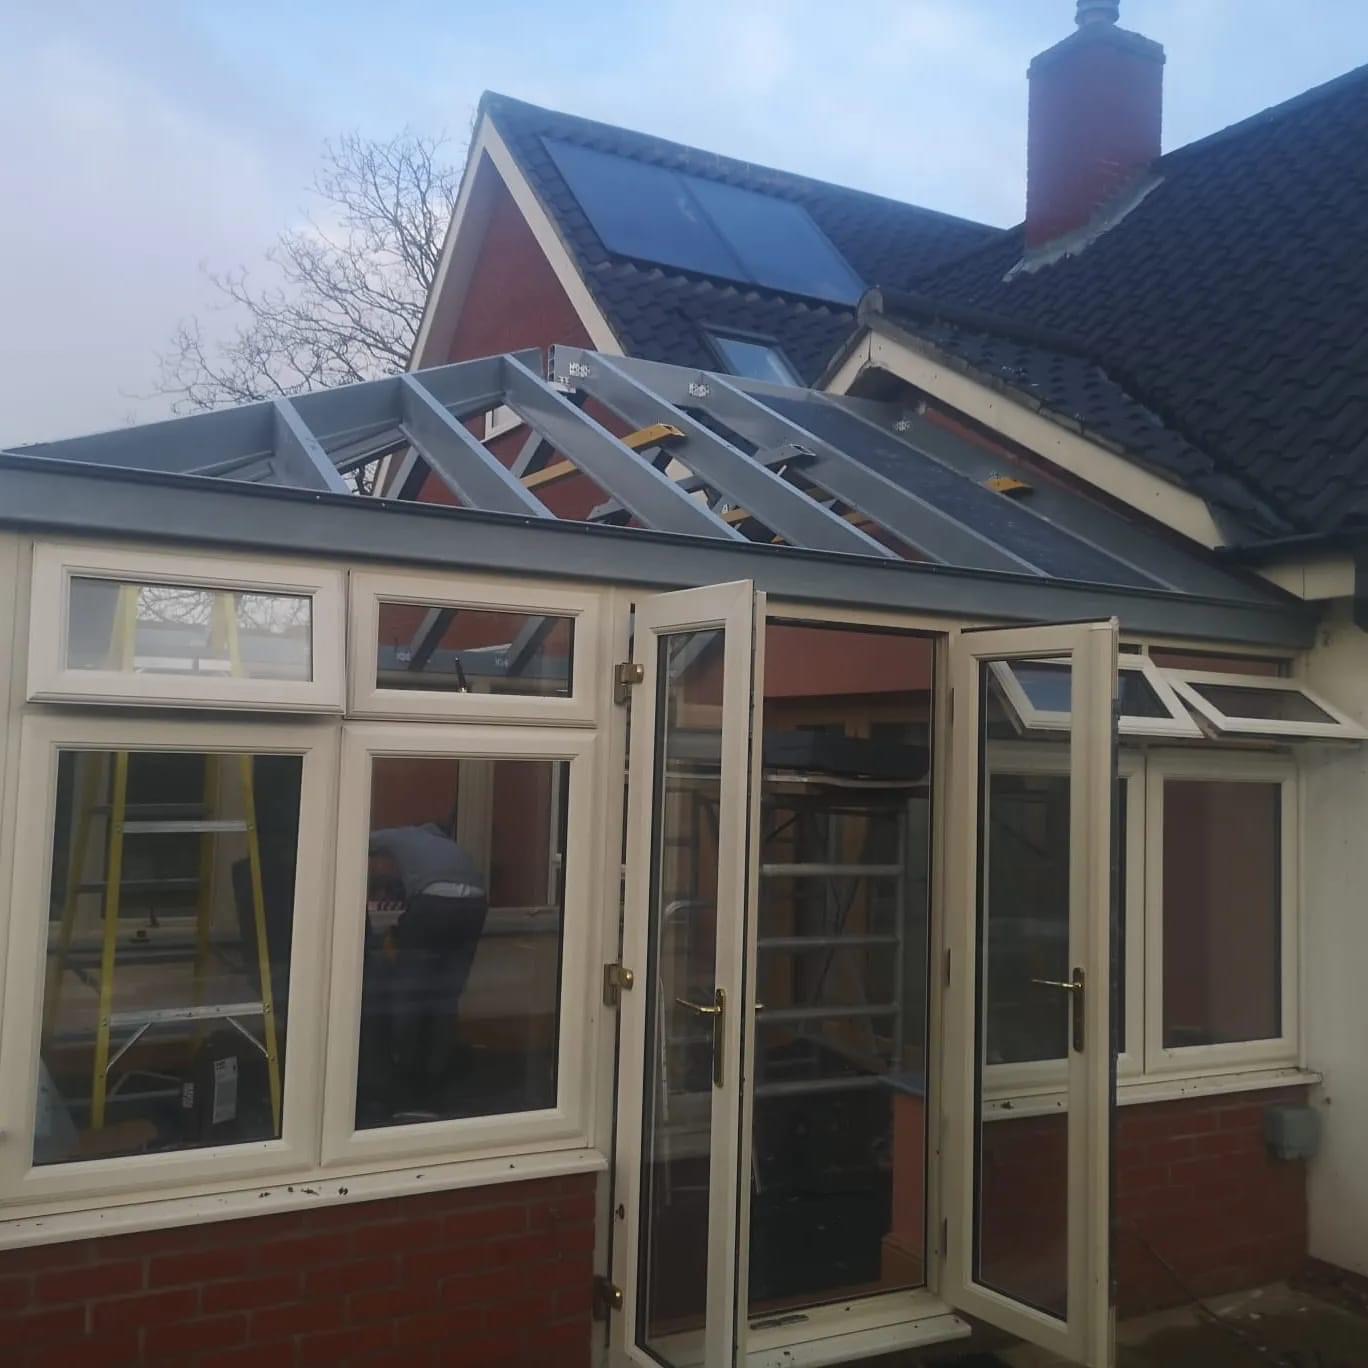 Conservatory roof without tiles and open door